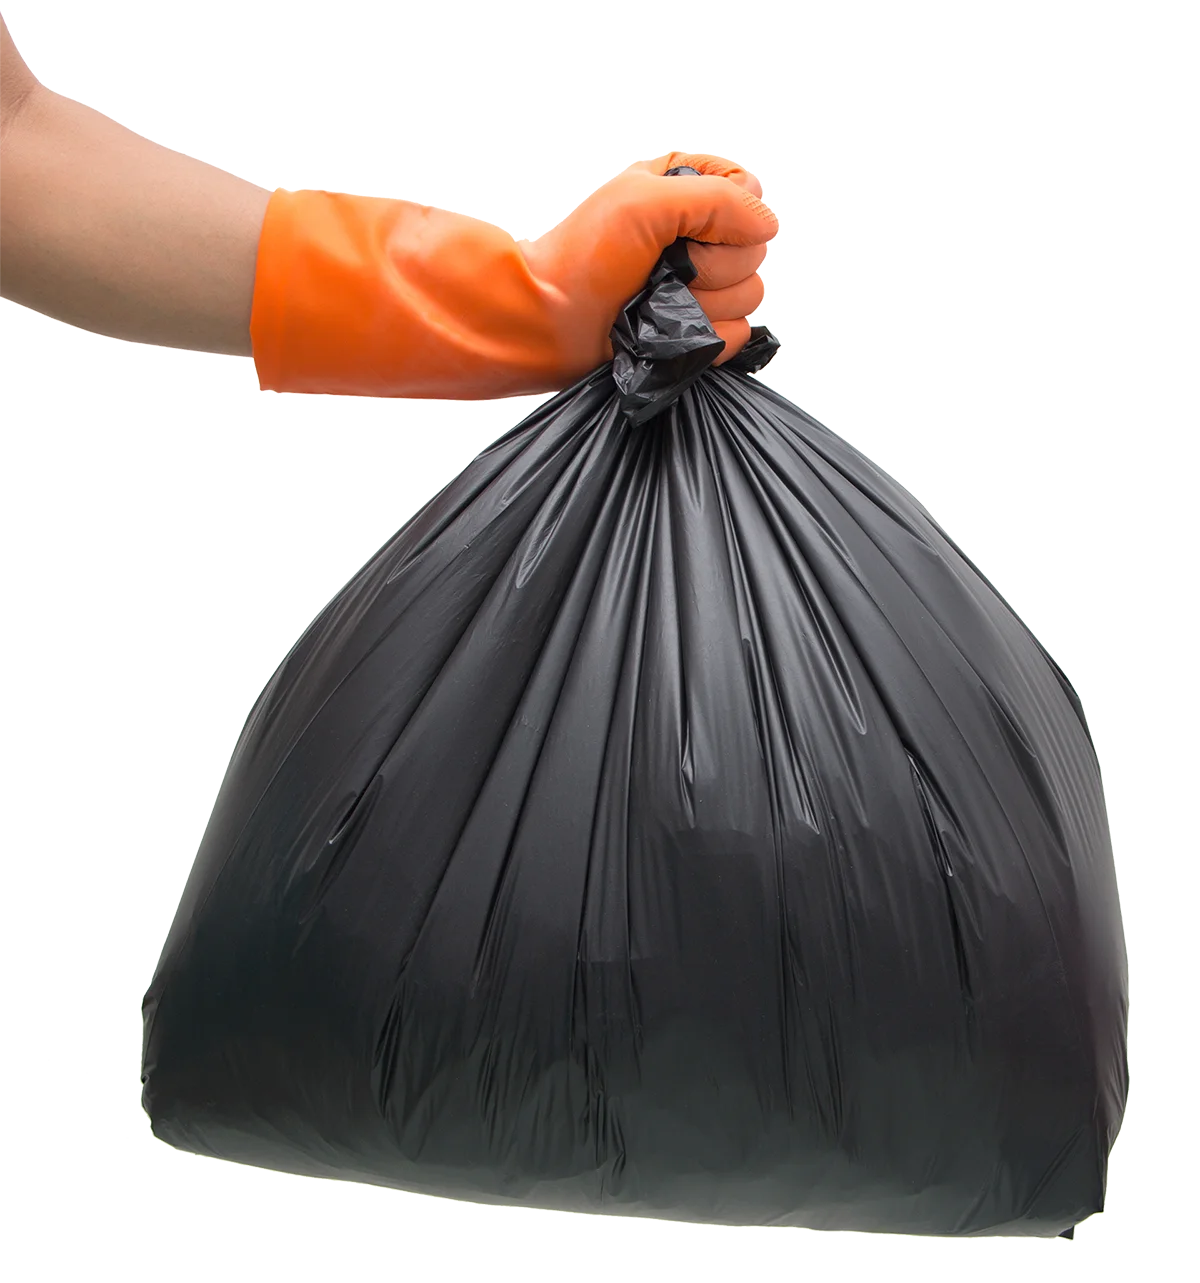 Residential Waste Service is the provider you can count on for professional doorstep trash services.